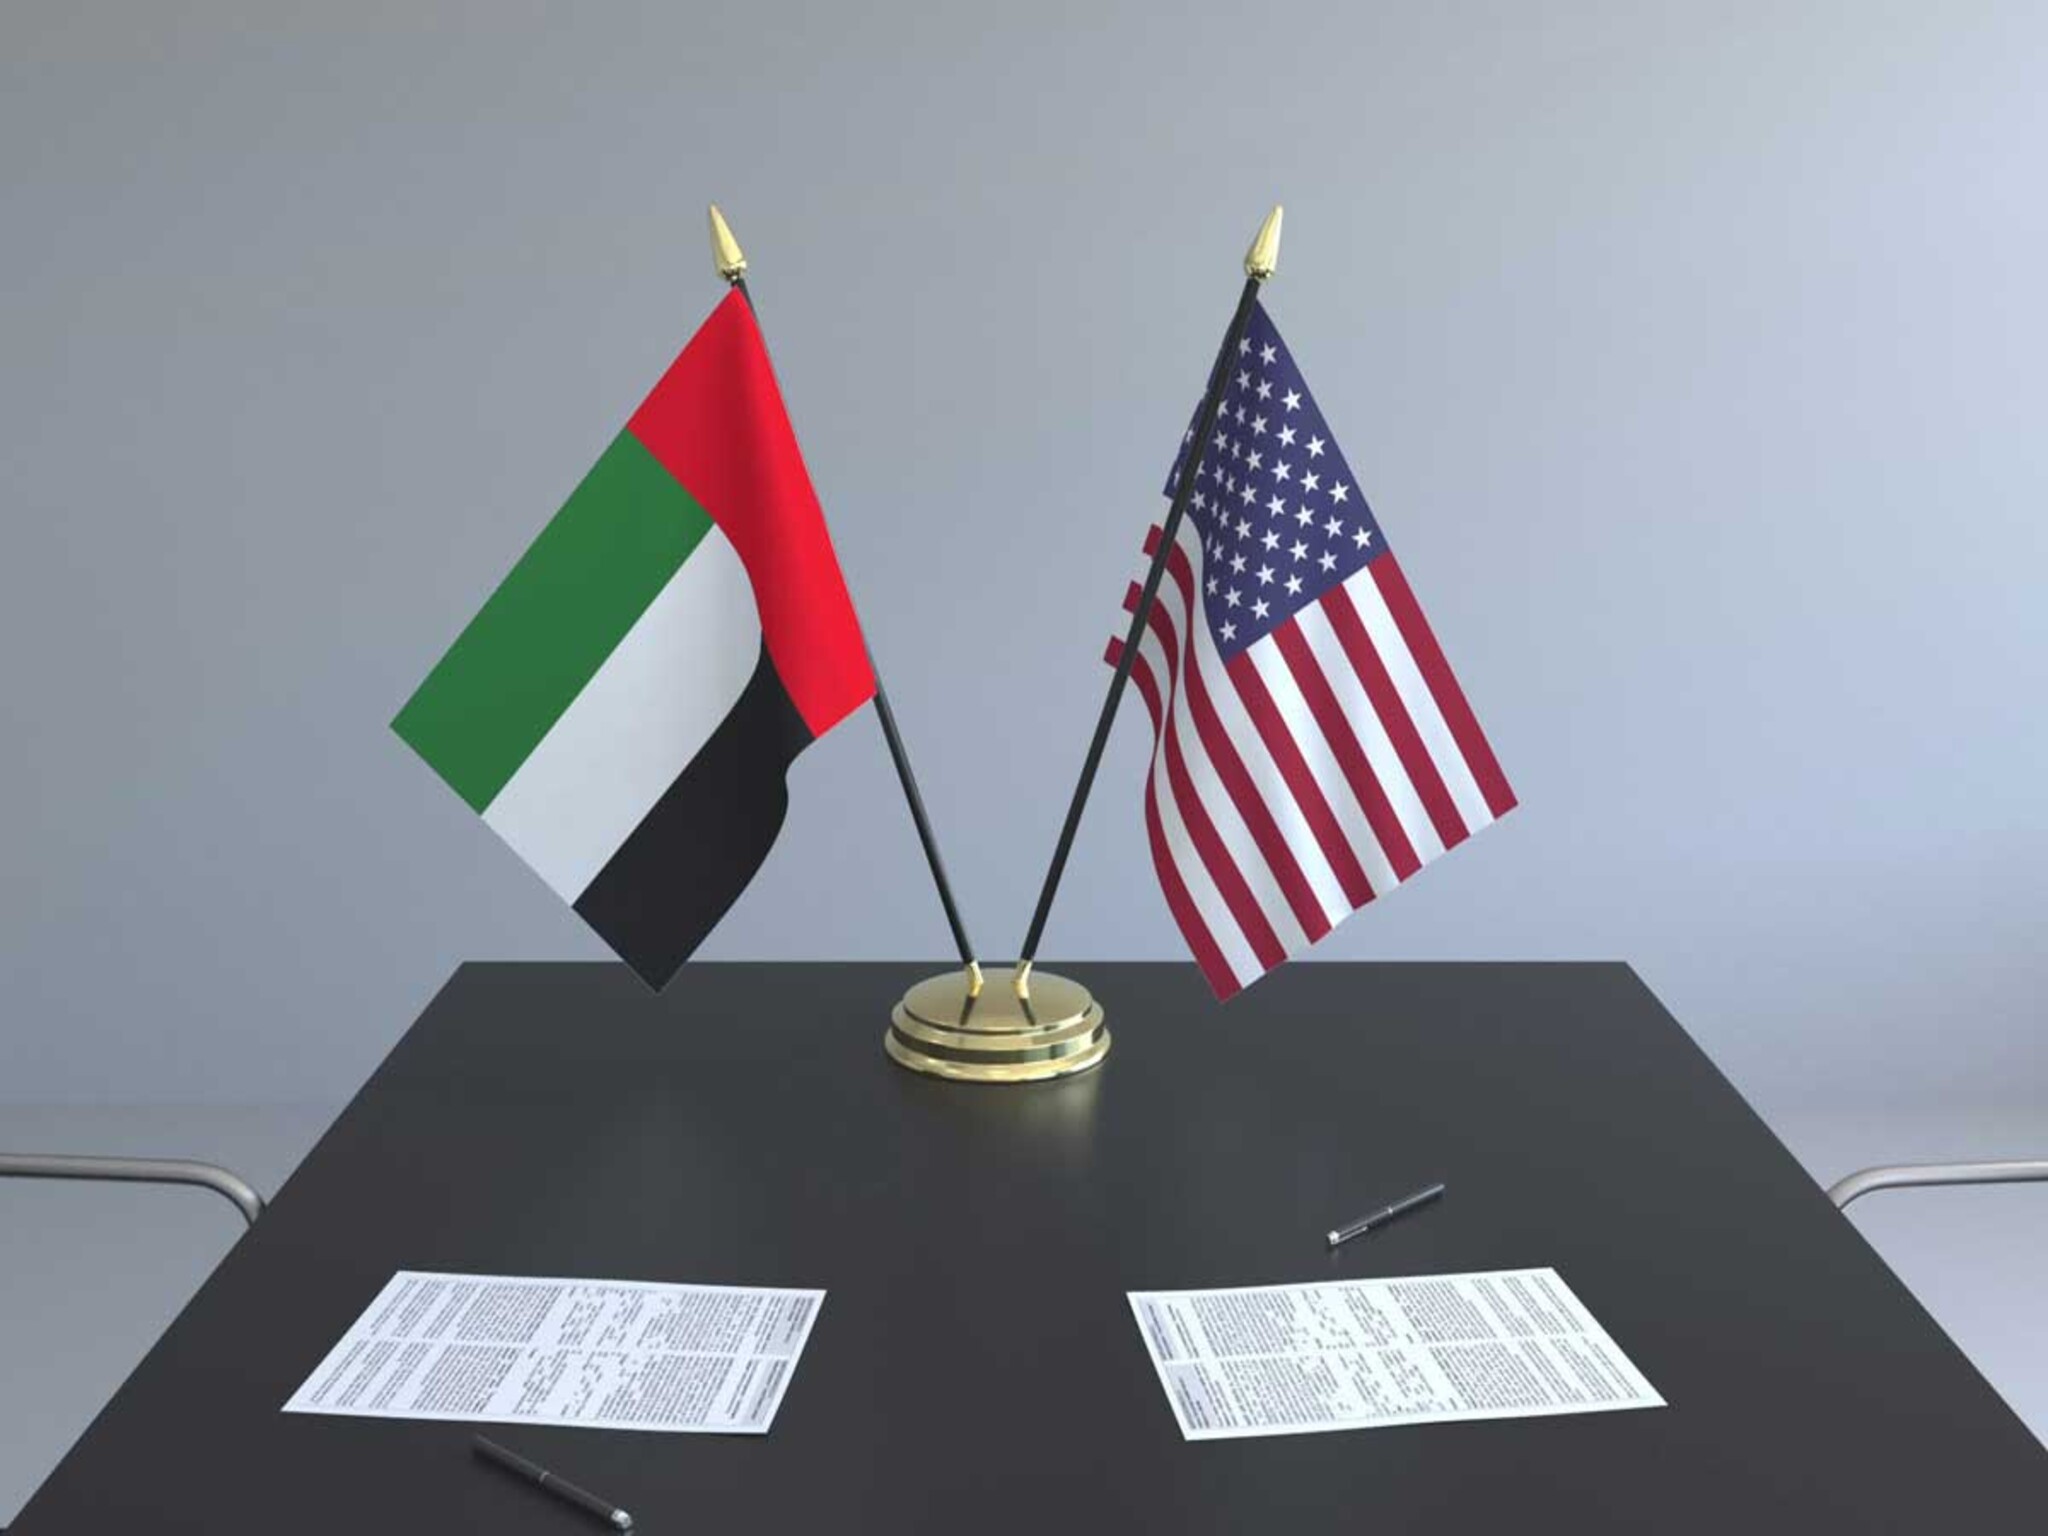 America and the UAE are holding high-level military talks to discuss integrated air and missile defense